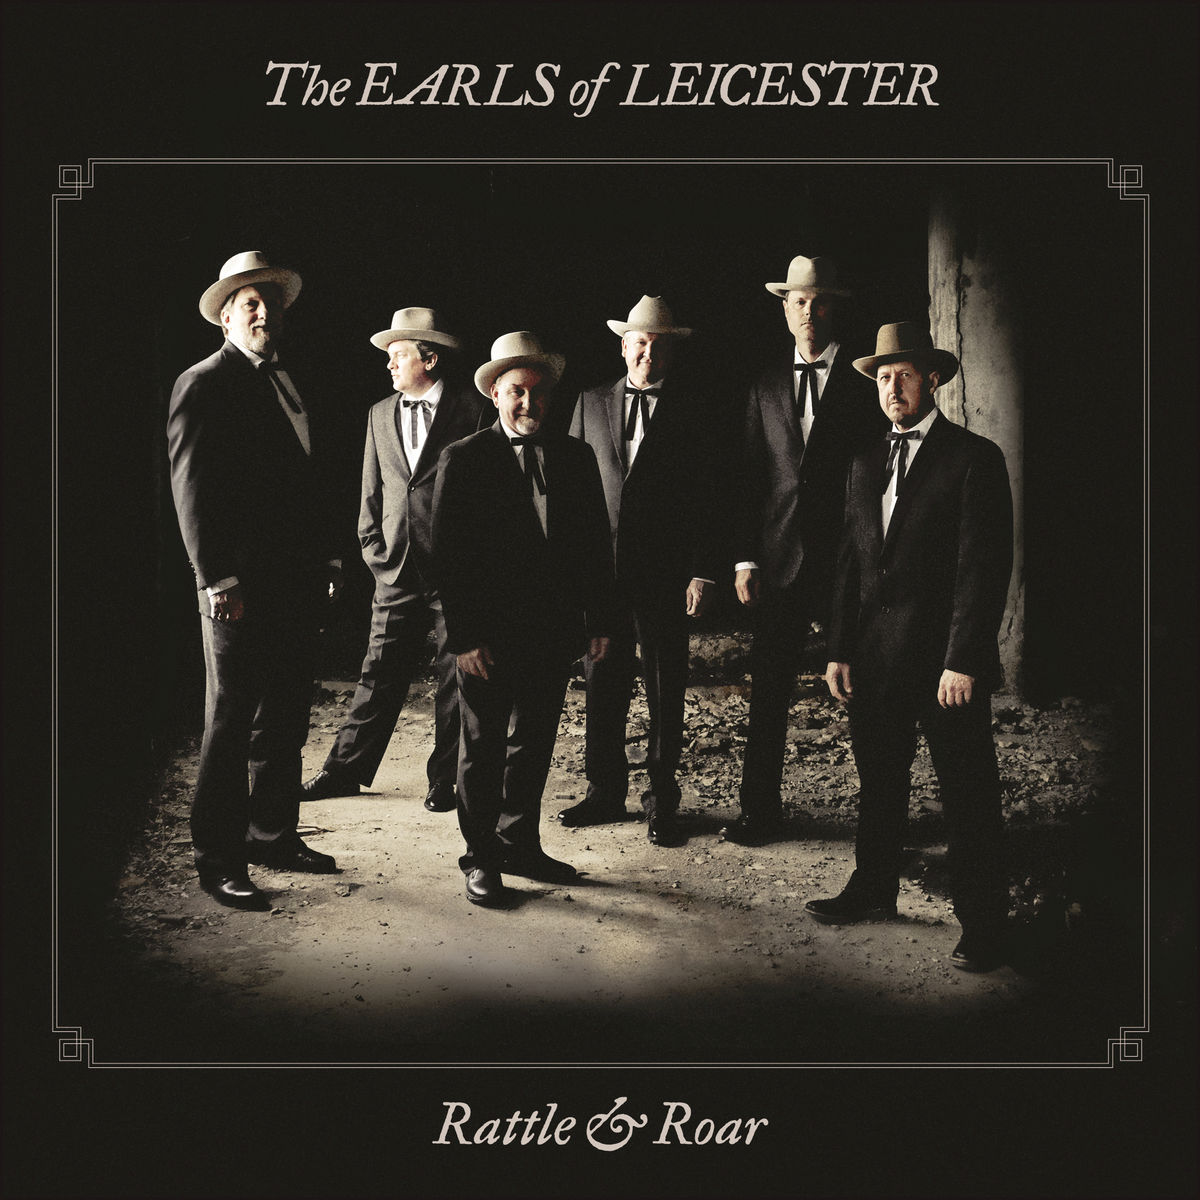 The Earls Of Leicester – Rattle & Roar (2016) [HDTracks FLAC 24bit/96kHz]